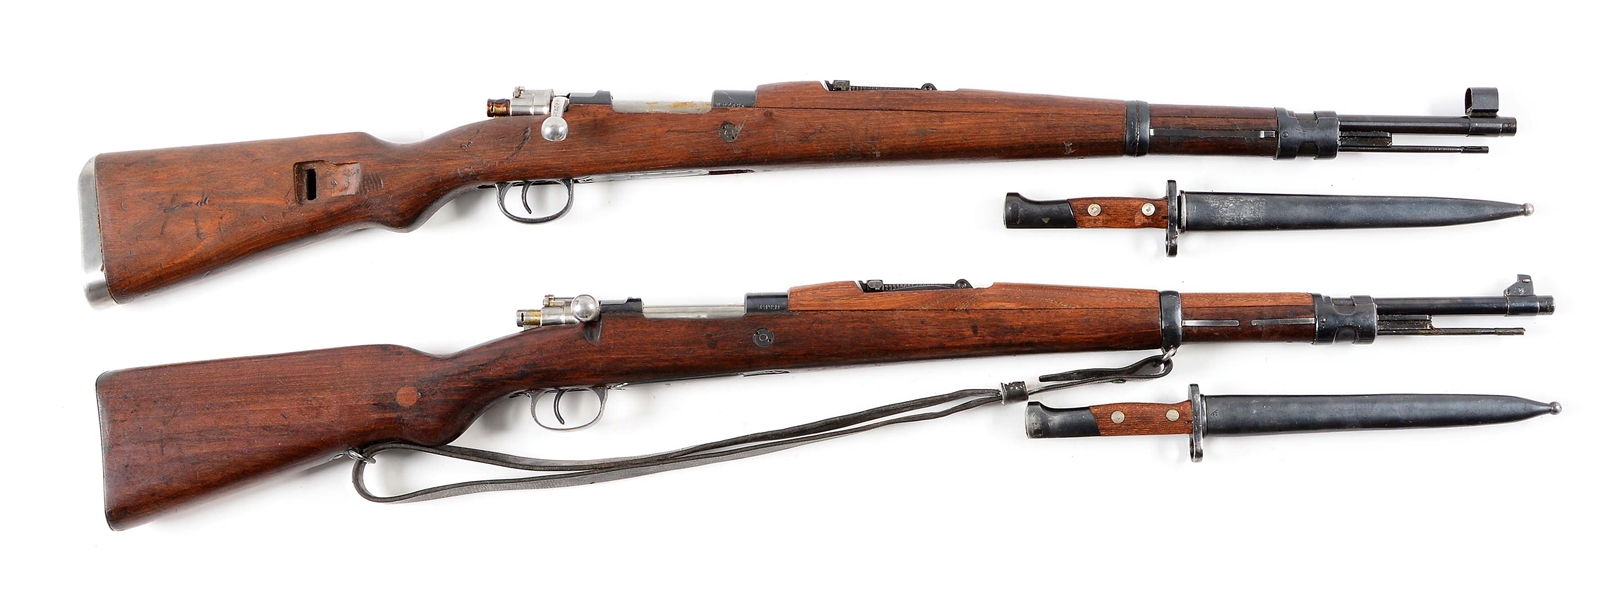 (C) LOT OF 2: YUGOSLAVIAN MILITARY MAUSER RIFLES WITH BAYONETS.